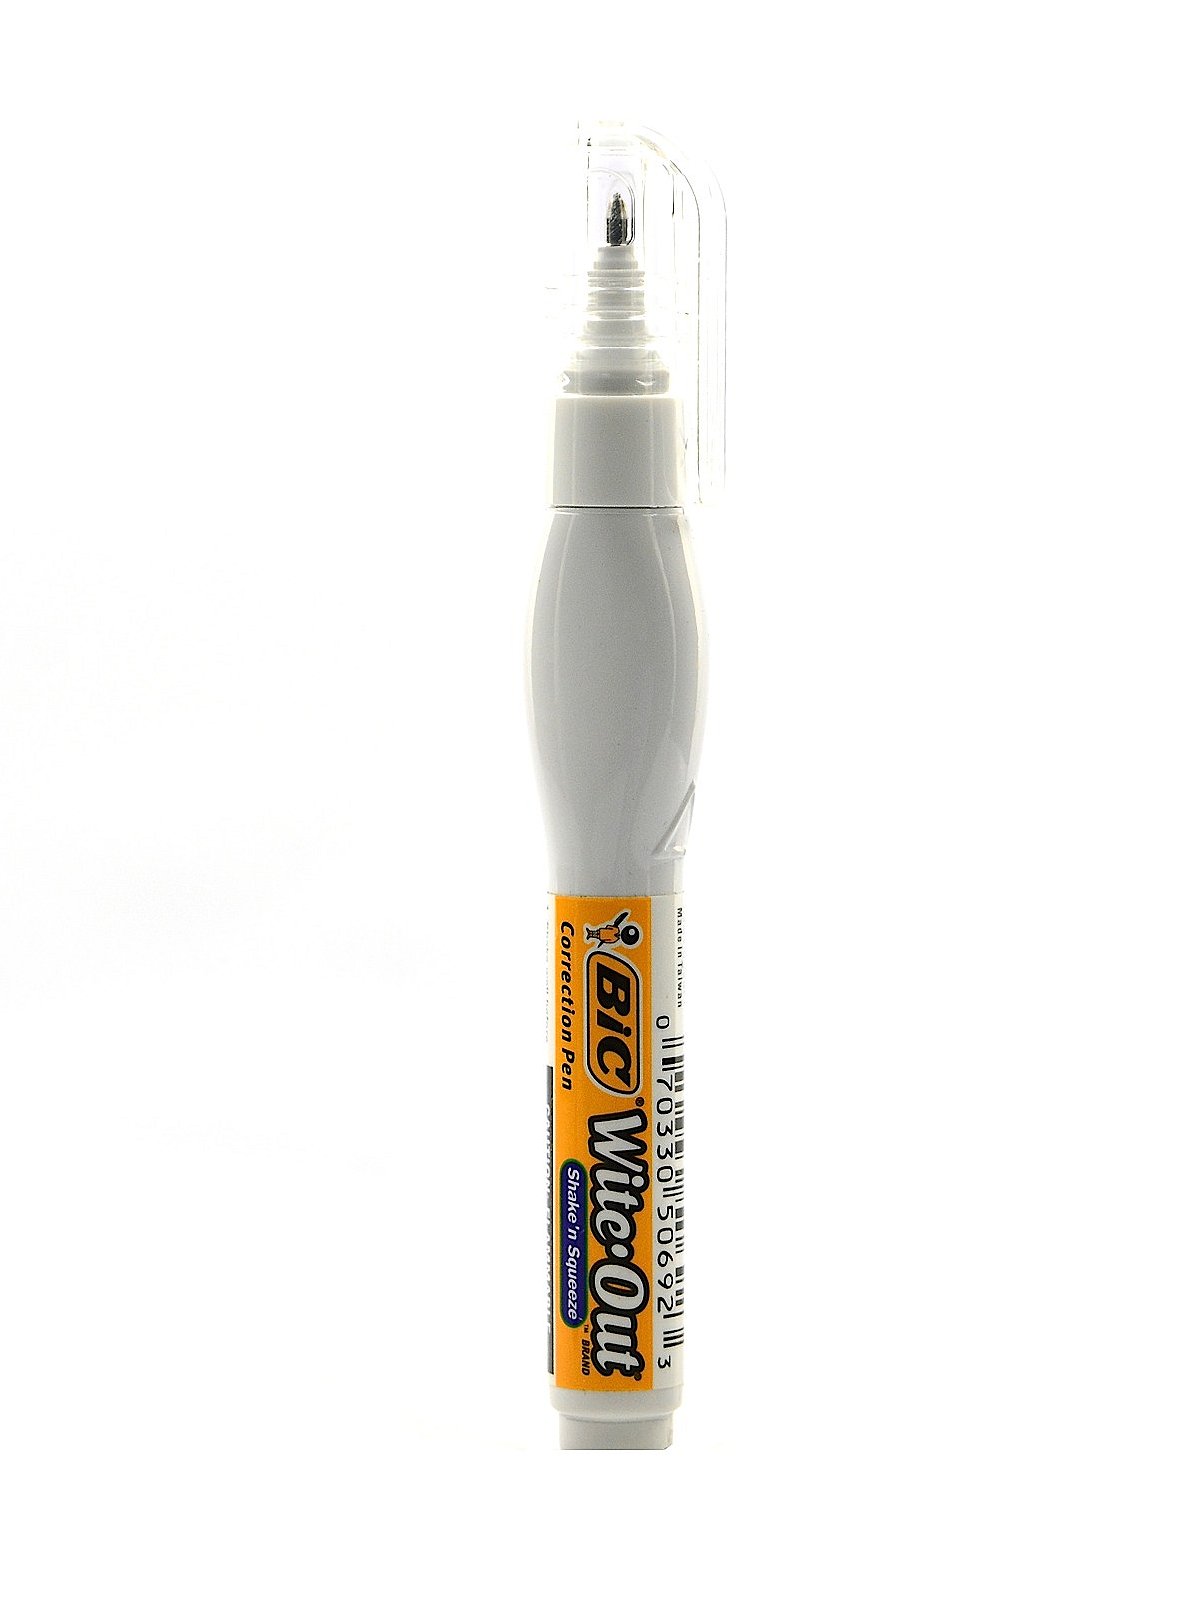 BIC Wite-Out Shake'n Squeeze Correction Pen, White